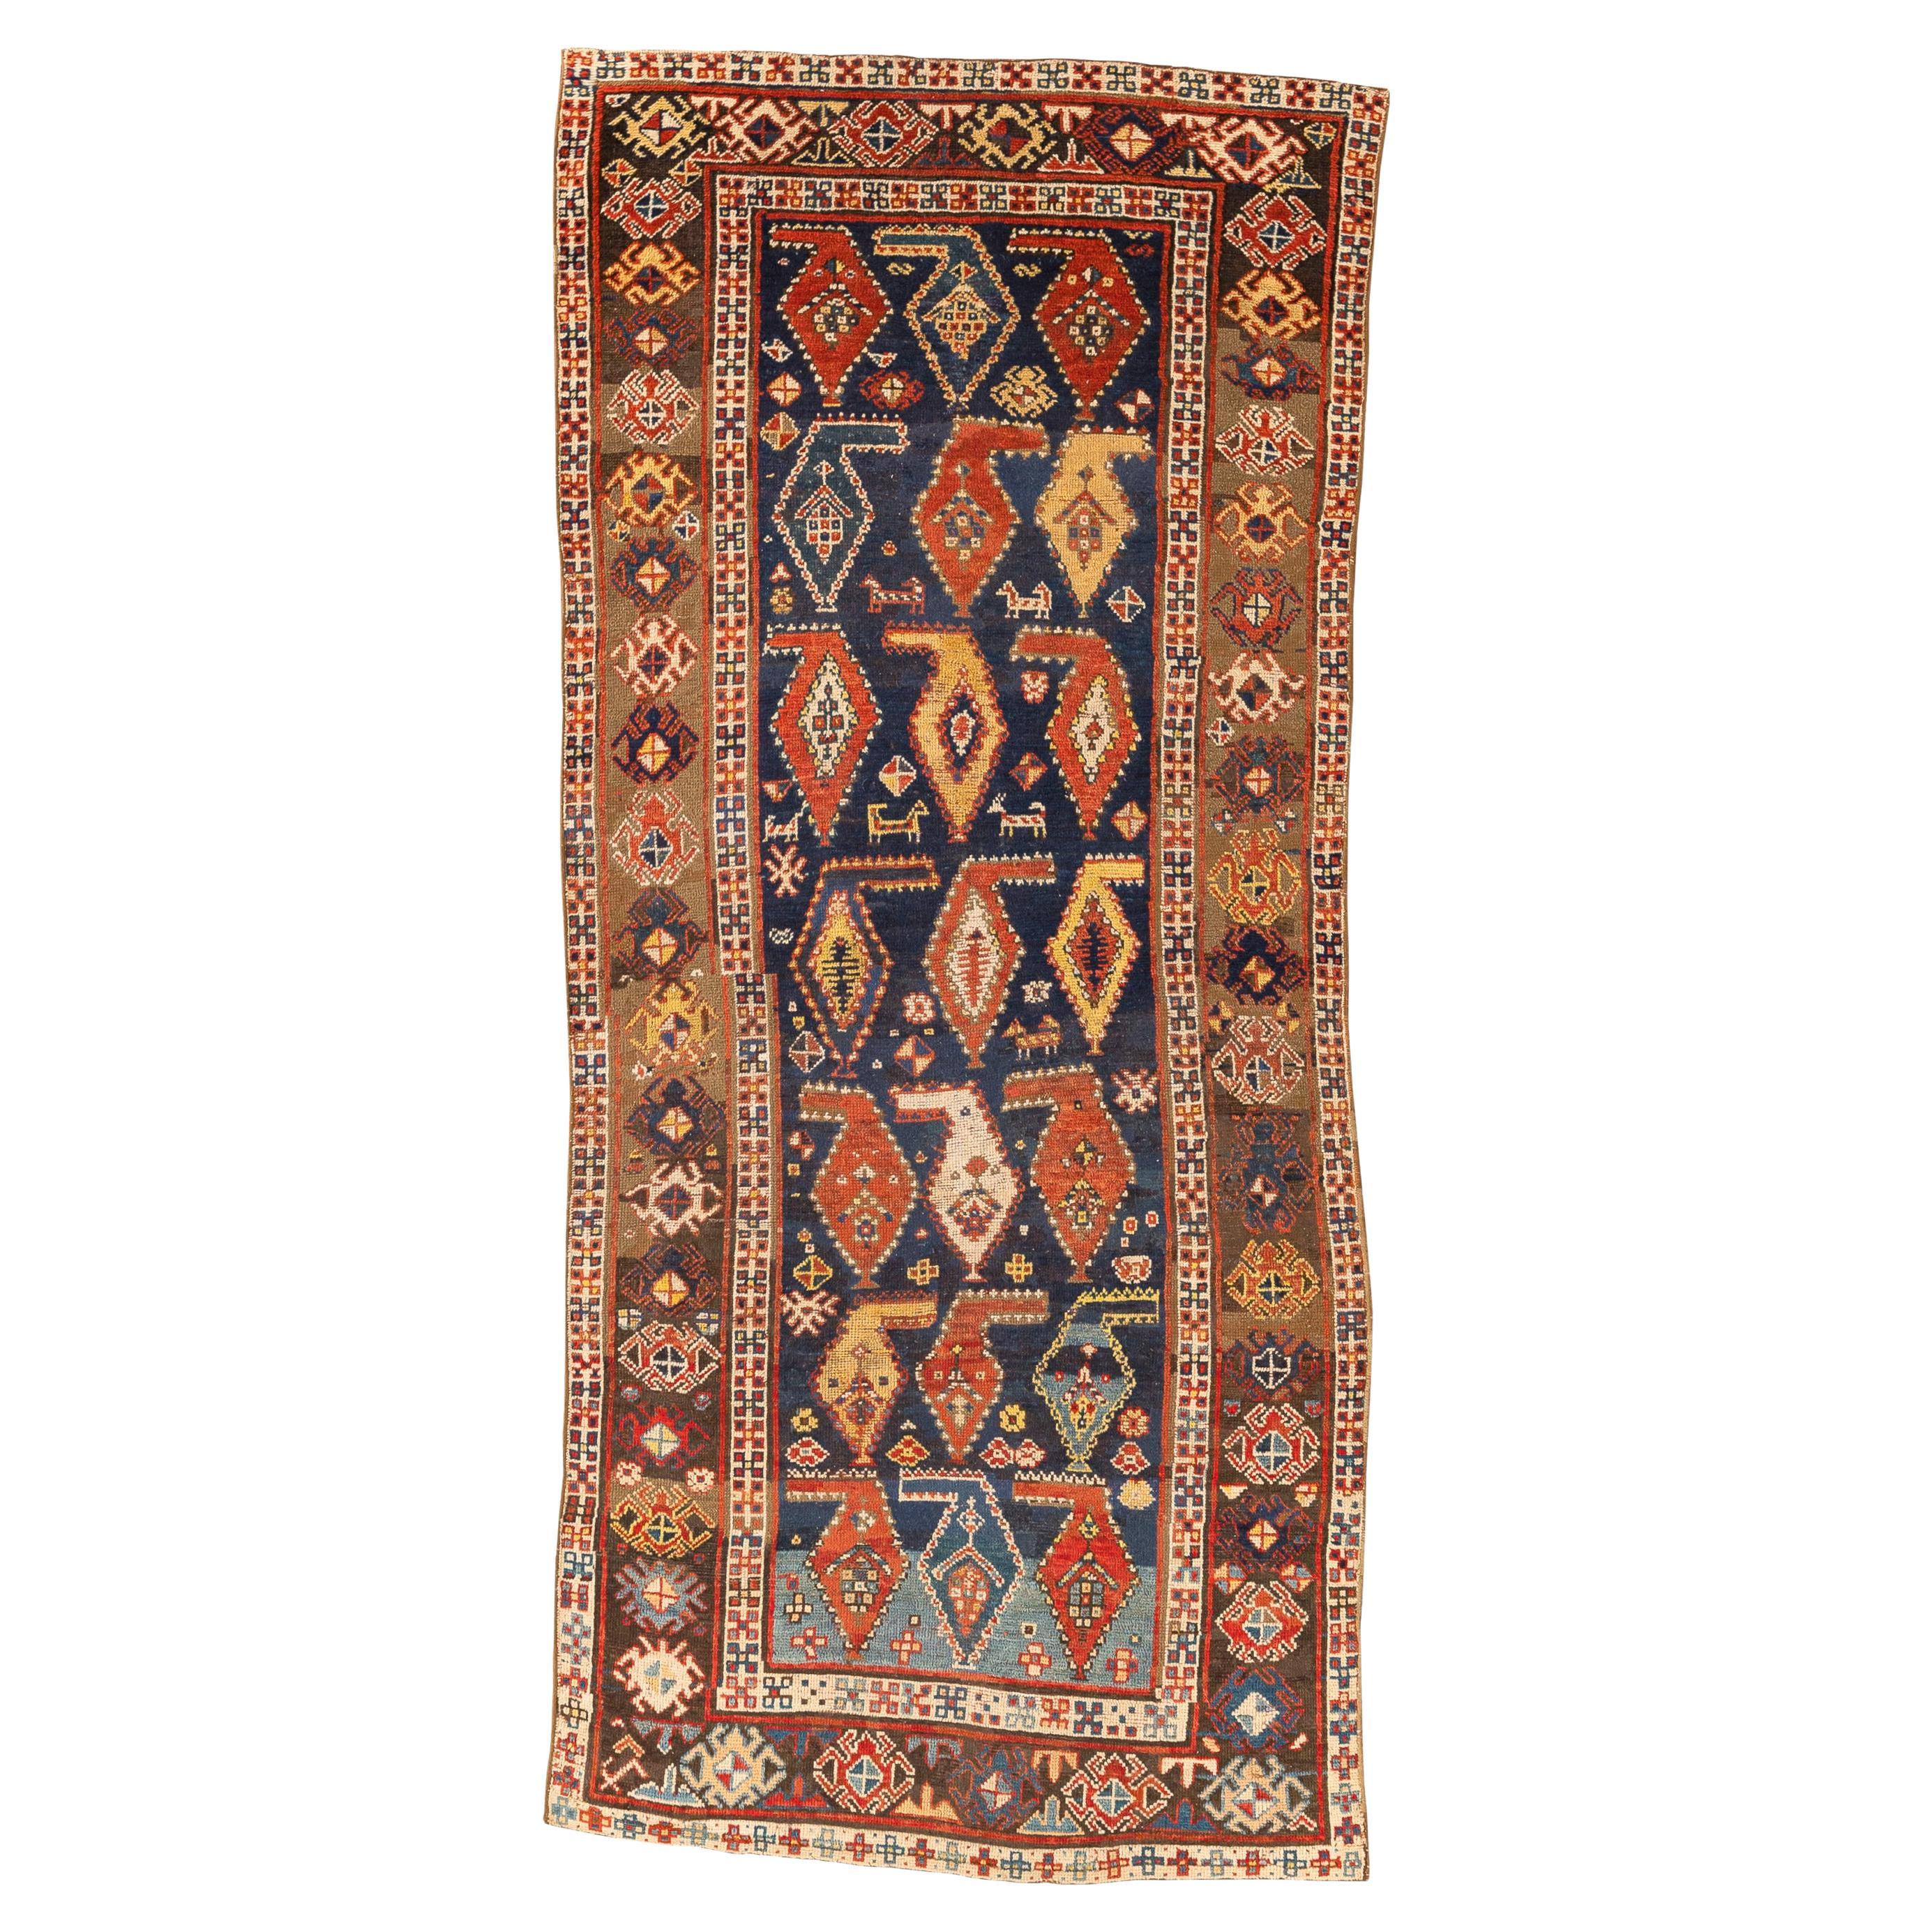 Karabagh - South Caucasus

This is an antique rug rich in geometric figures. The dark blue central field is dominated by three horizontal rows of botehs and seven vertical columns. The botehs are suspended from a horizontal strap at the top that